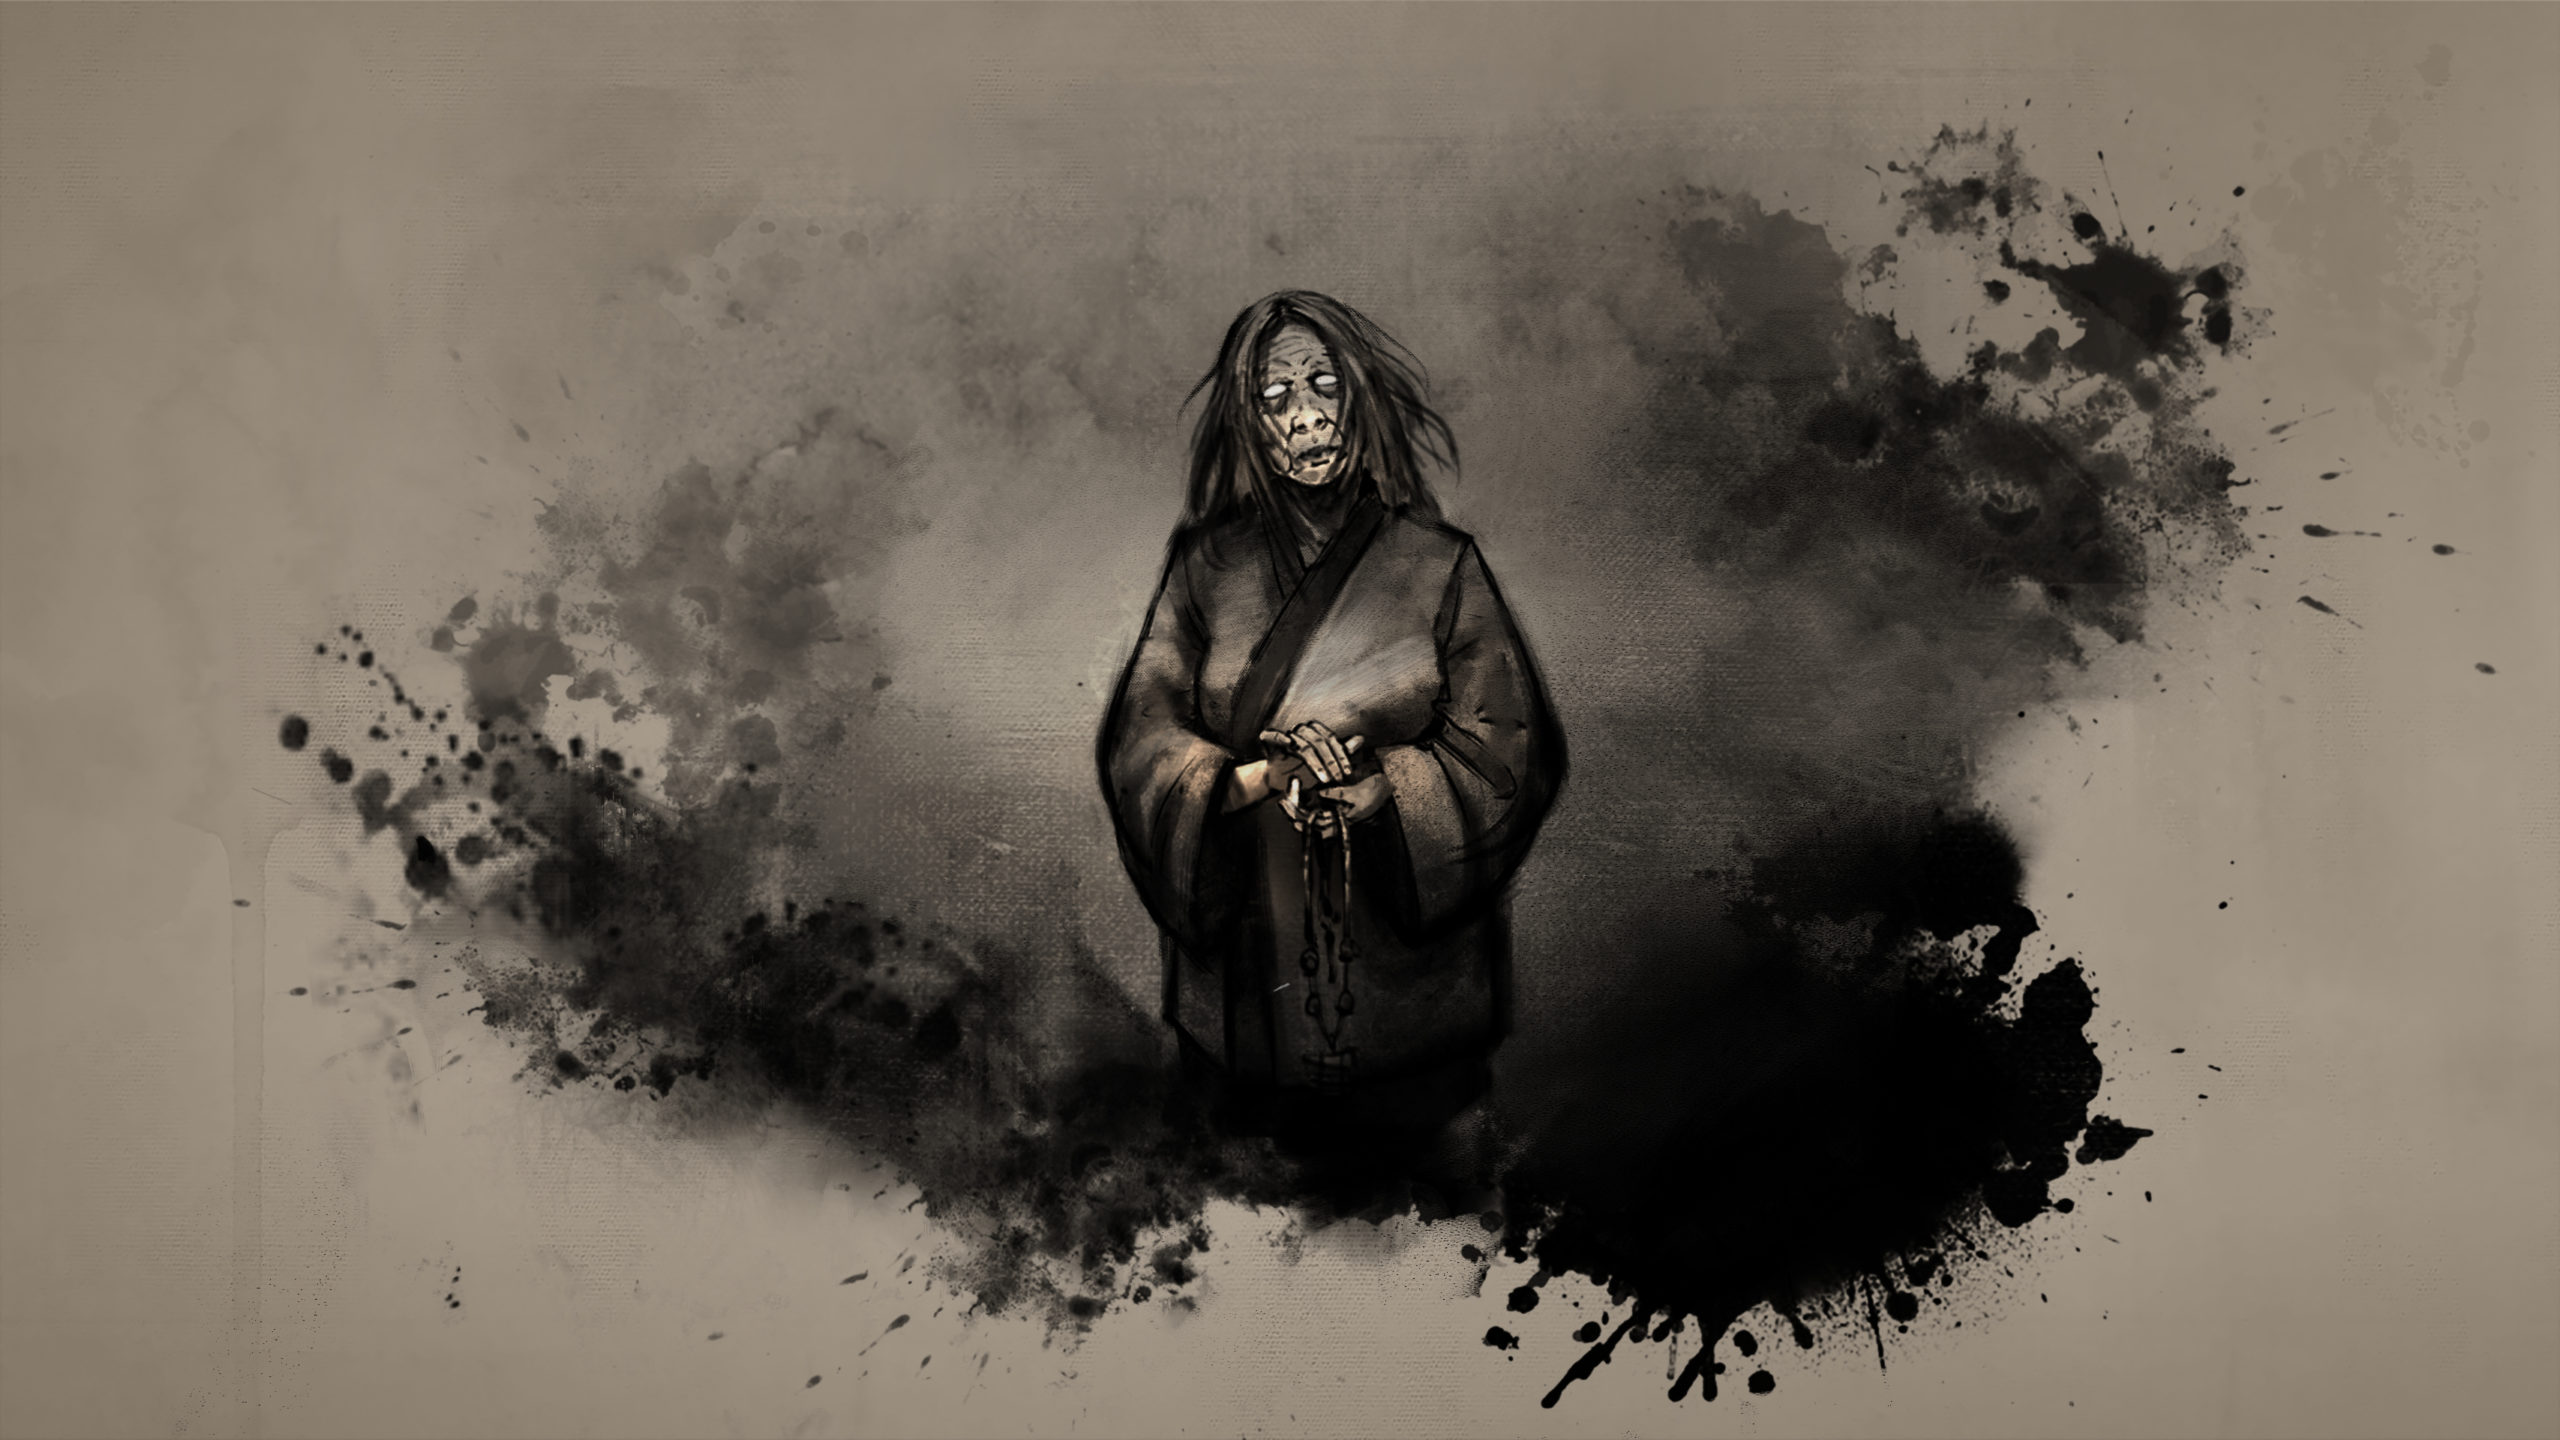 A stylized, ink painting like, piece of concept artwork. It depicts an older woman with white eyes, standing while holding a set of beads in her hands.